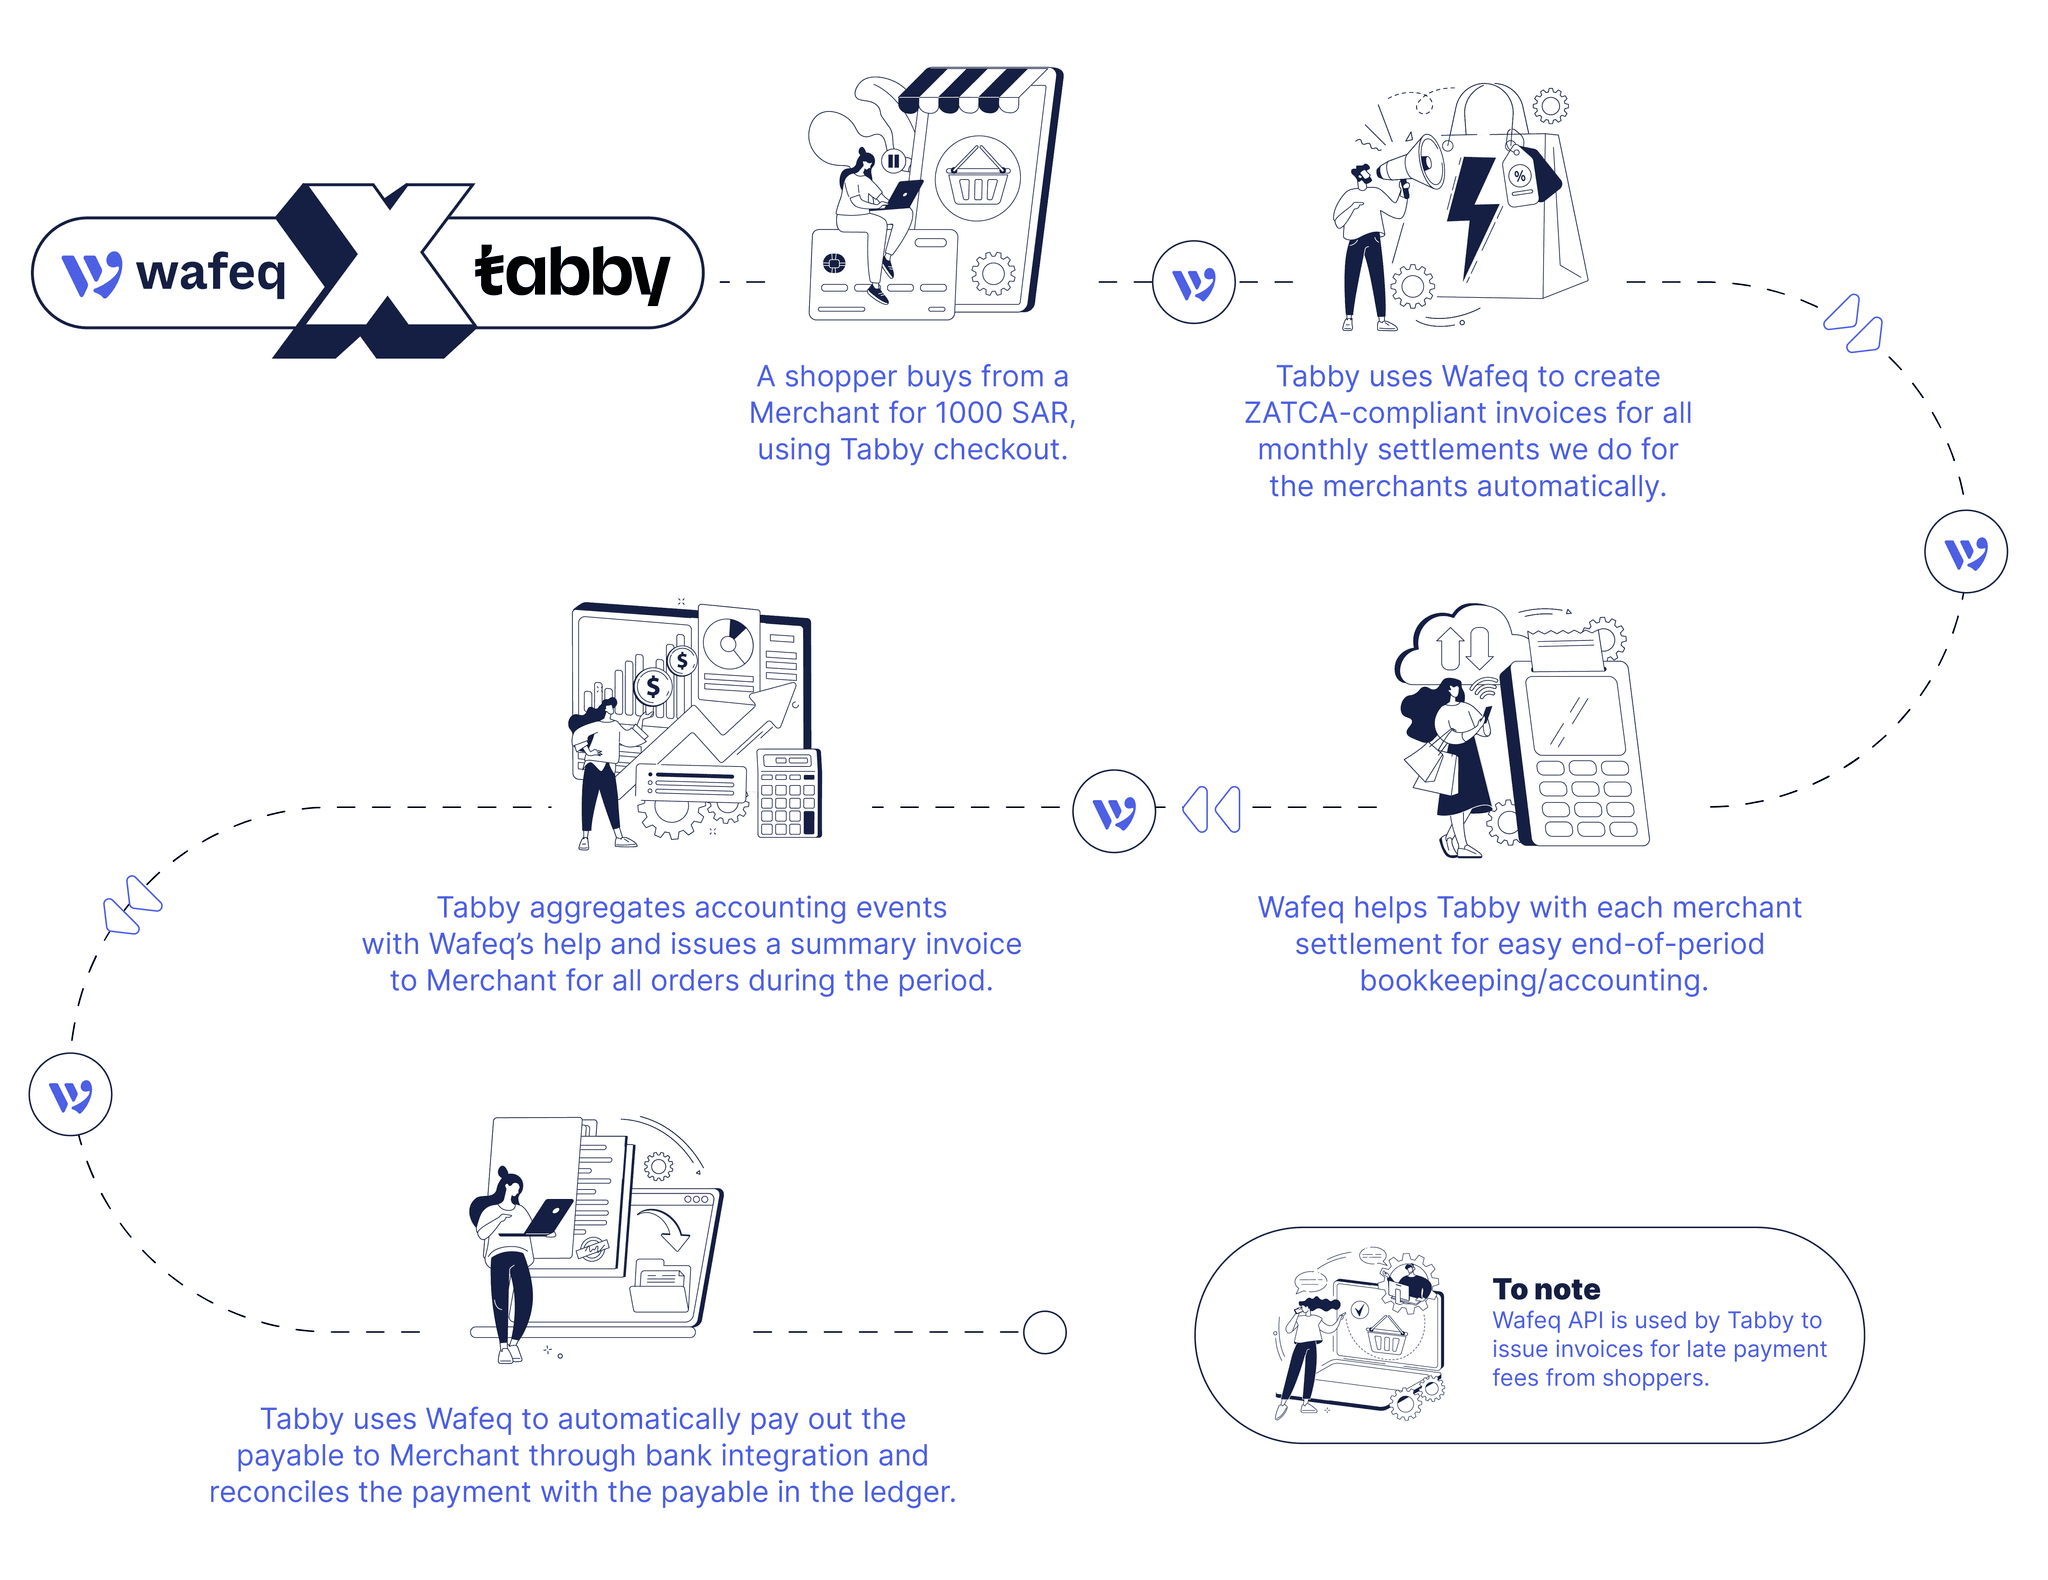 Tabby's Payment and Invoicing Process